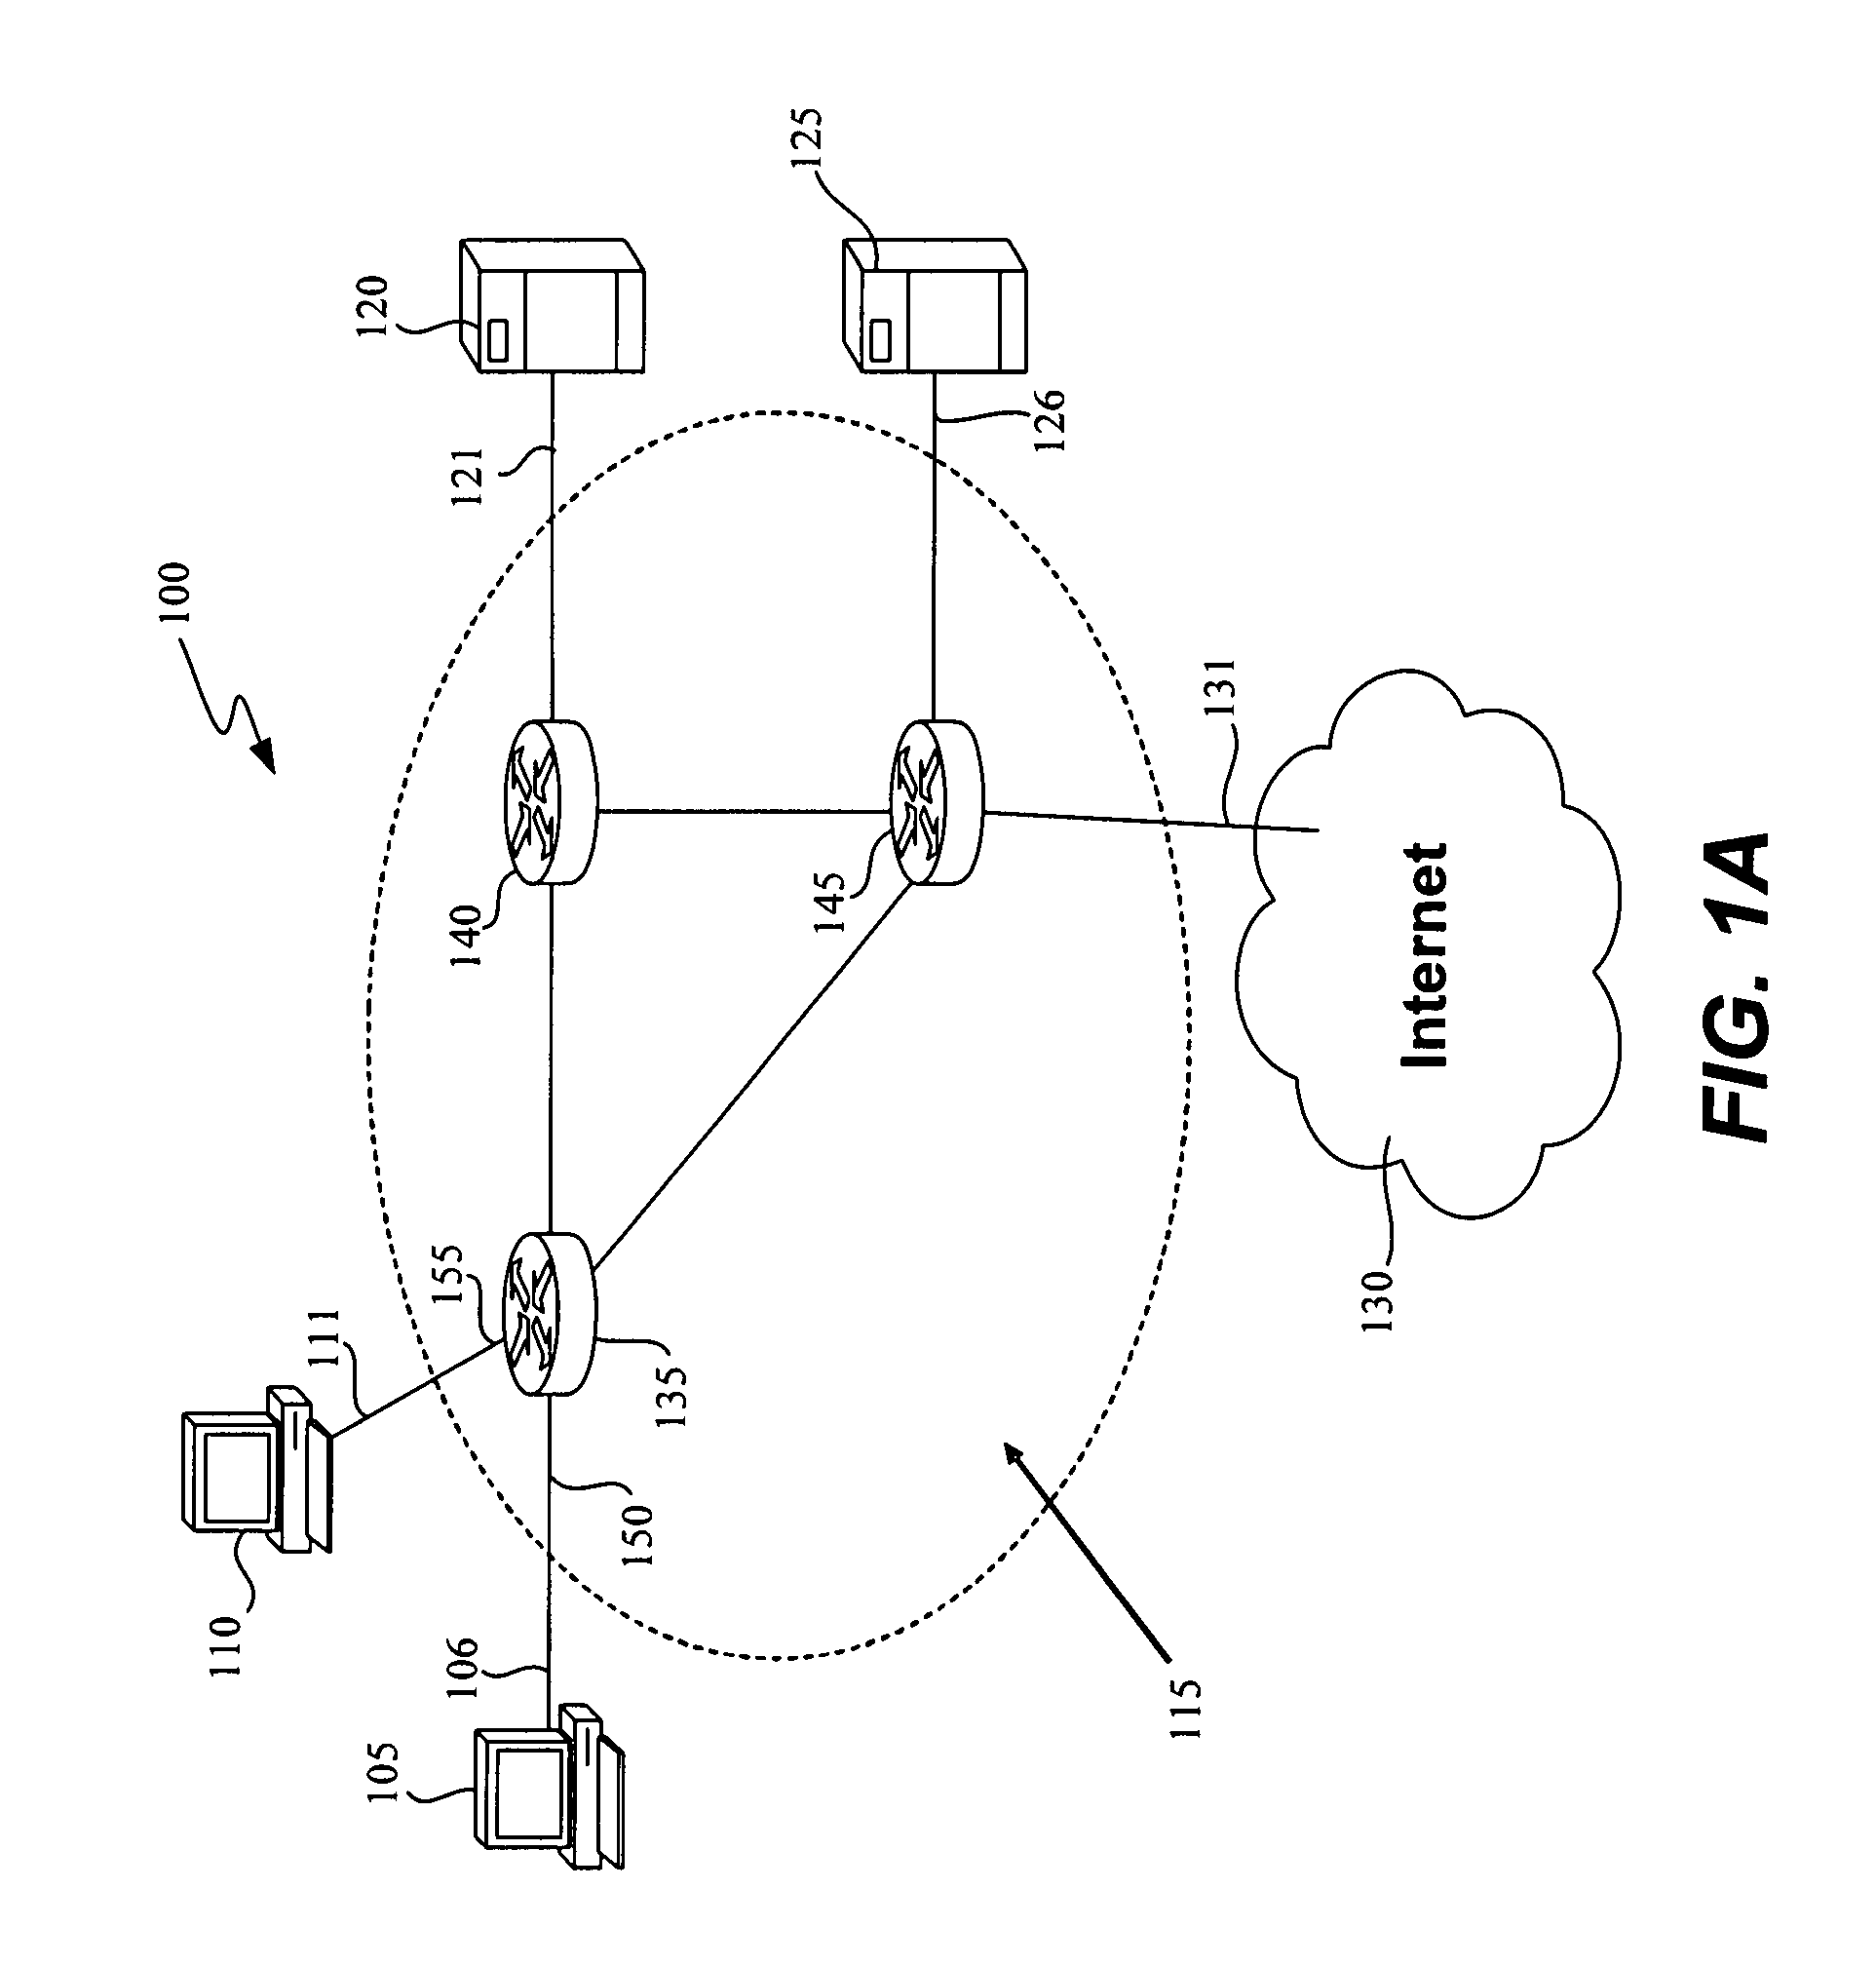 Method and apparatus for role-based access control